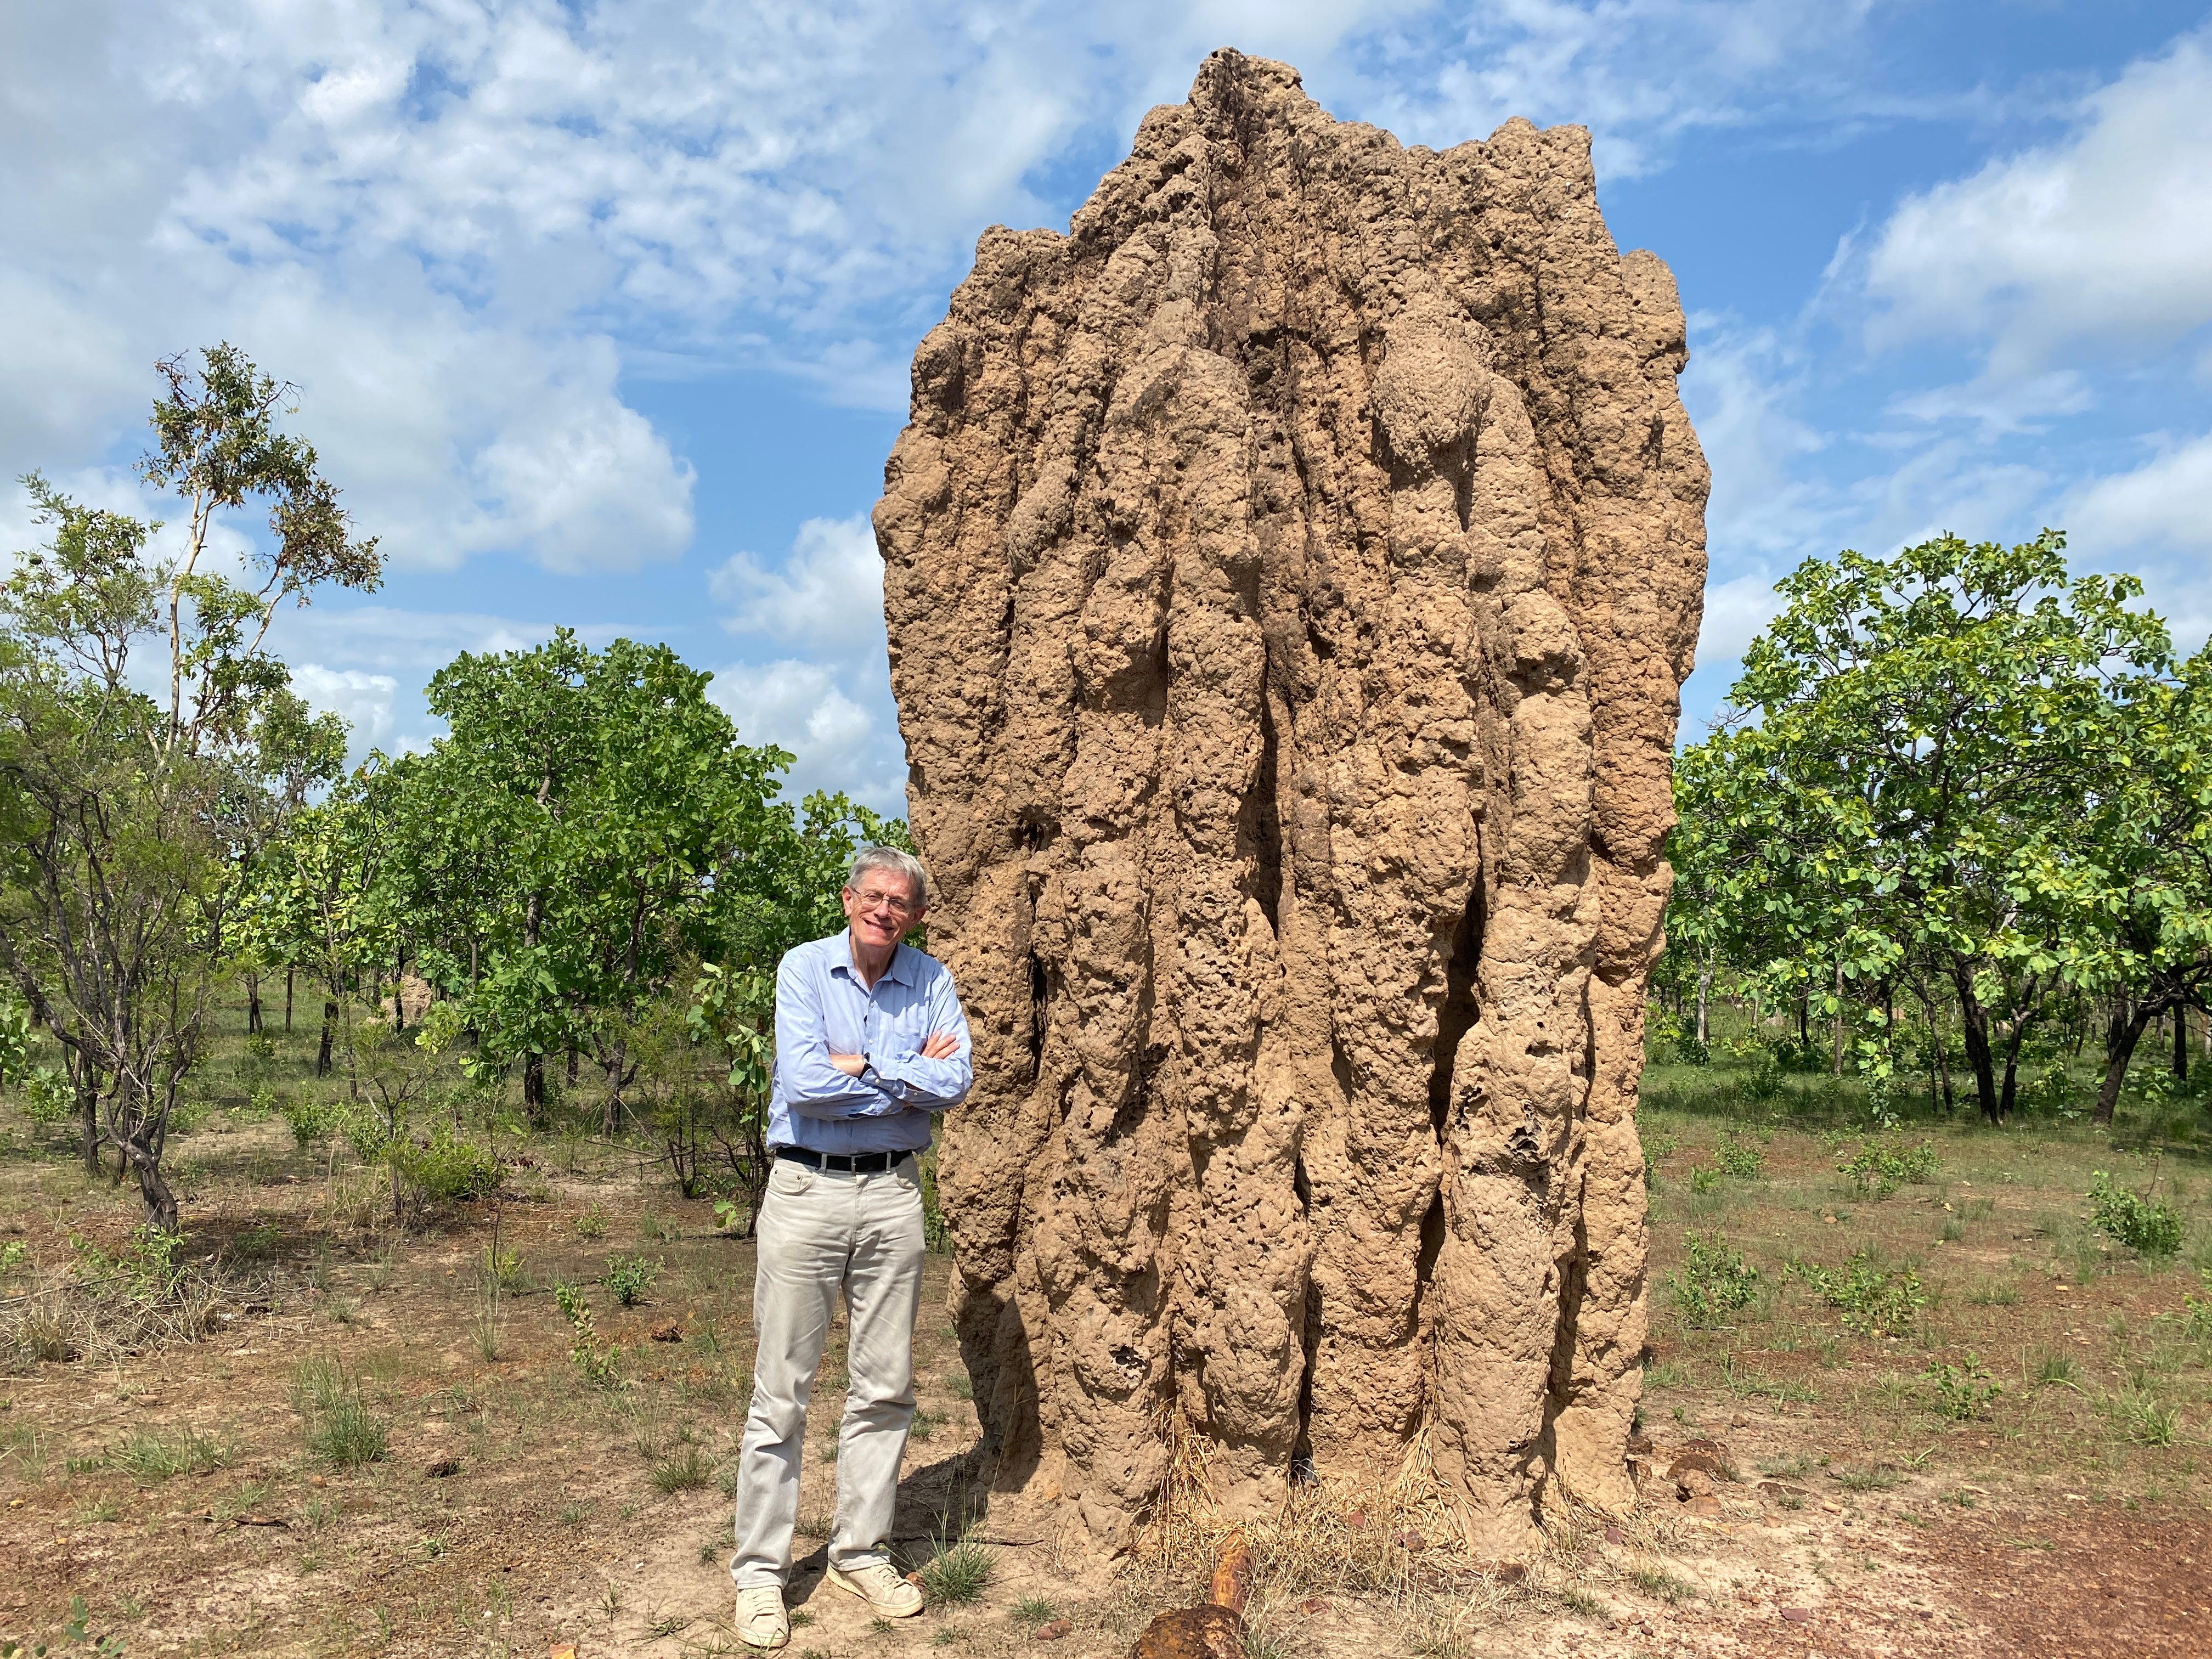 In Kakadu Park, ancient wonders abound – like this otherworldly formation made by termites